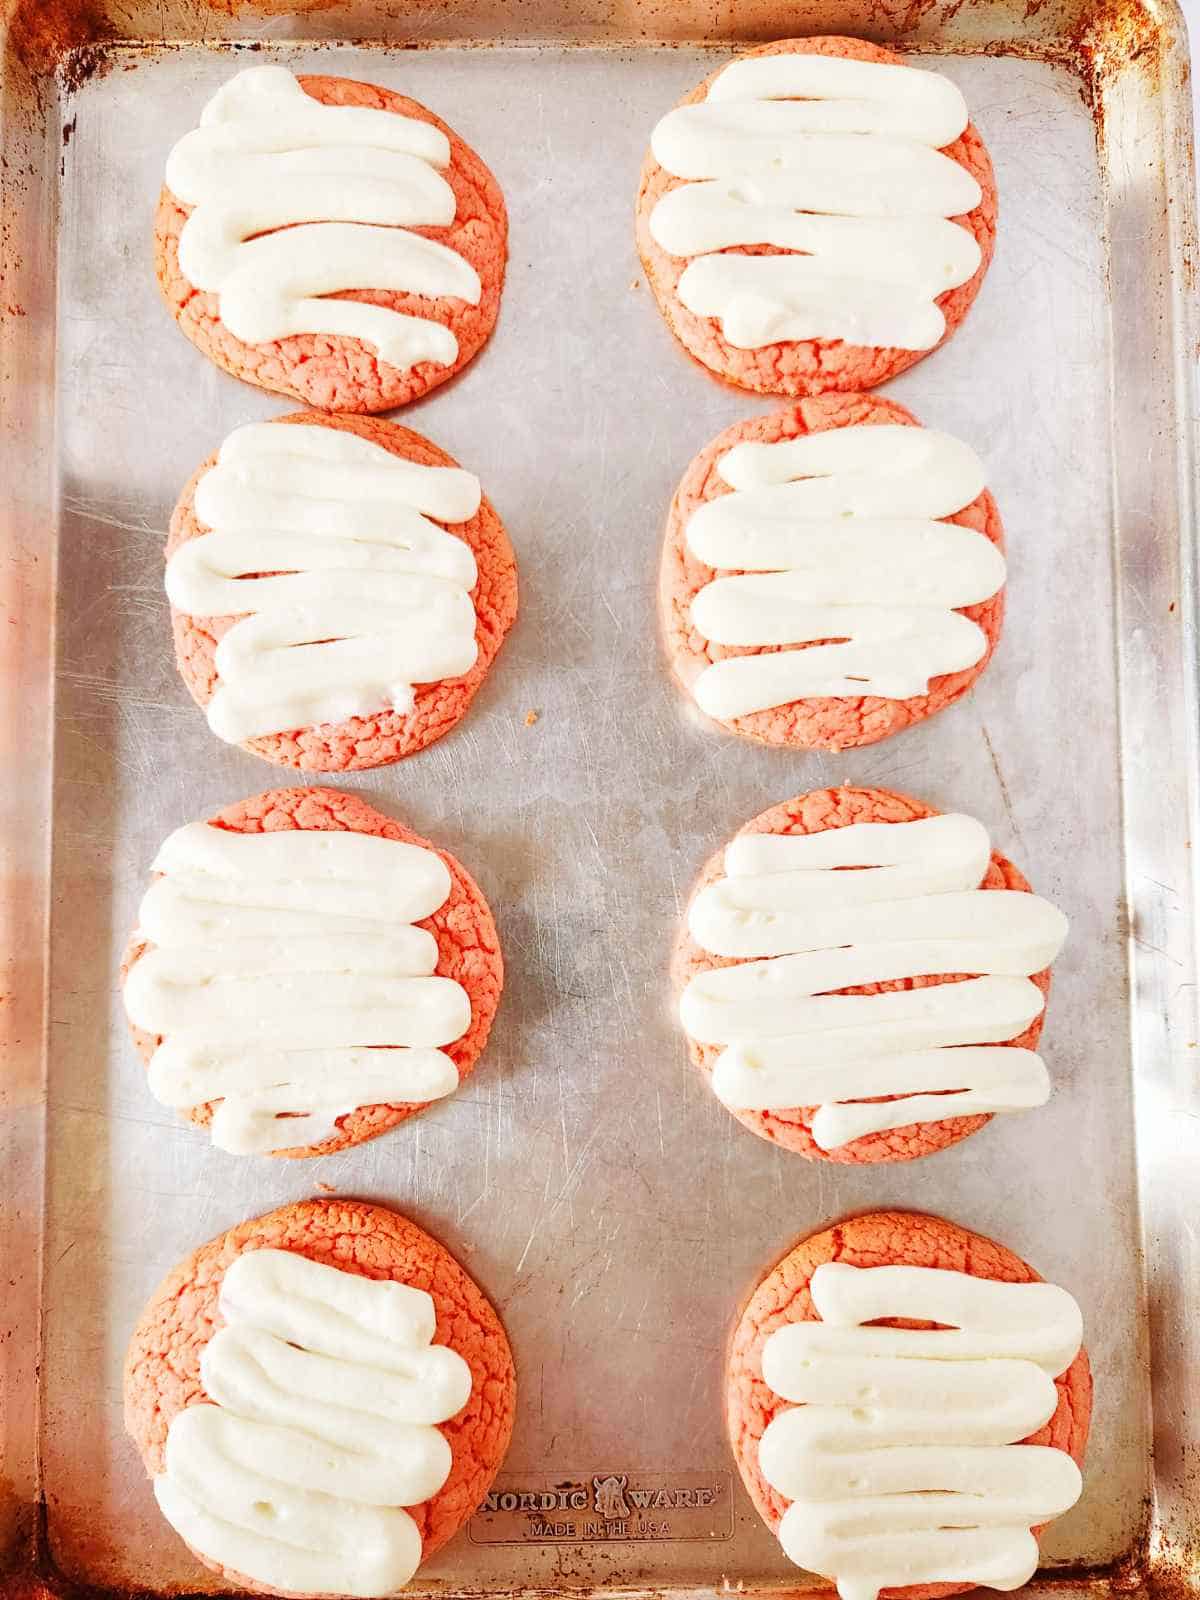 buttercream frosting piped on strawberry cookies.